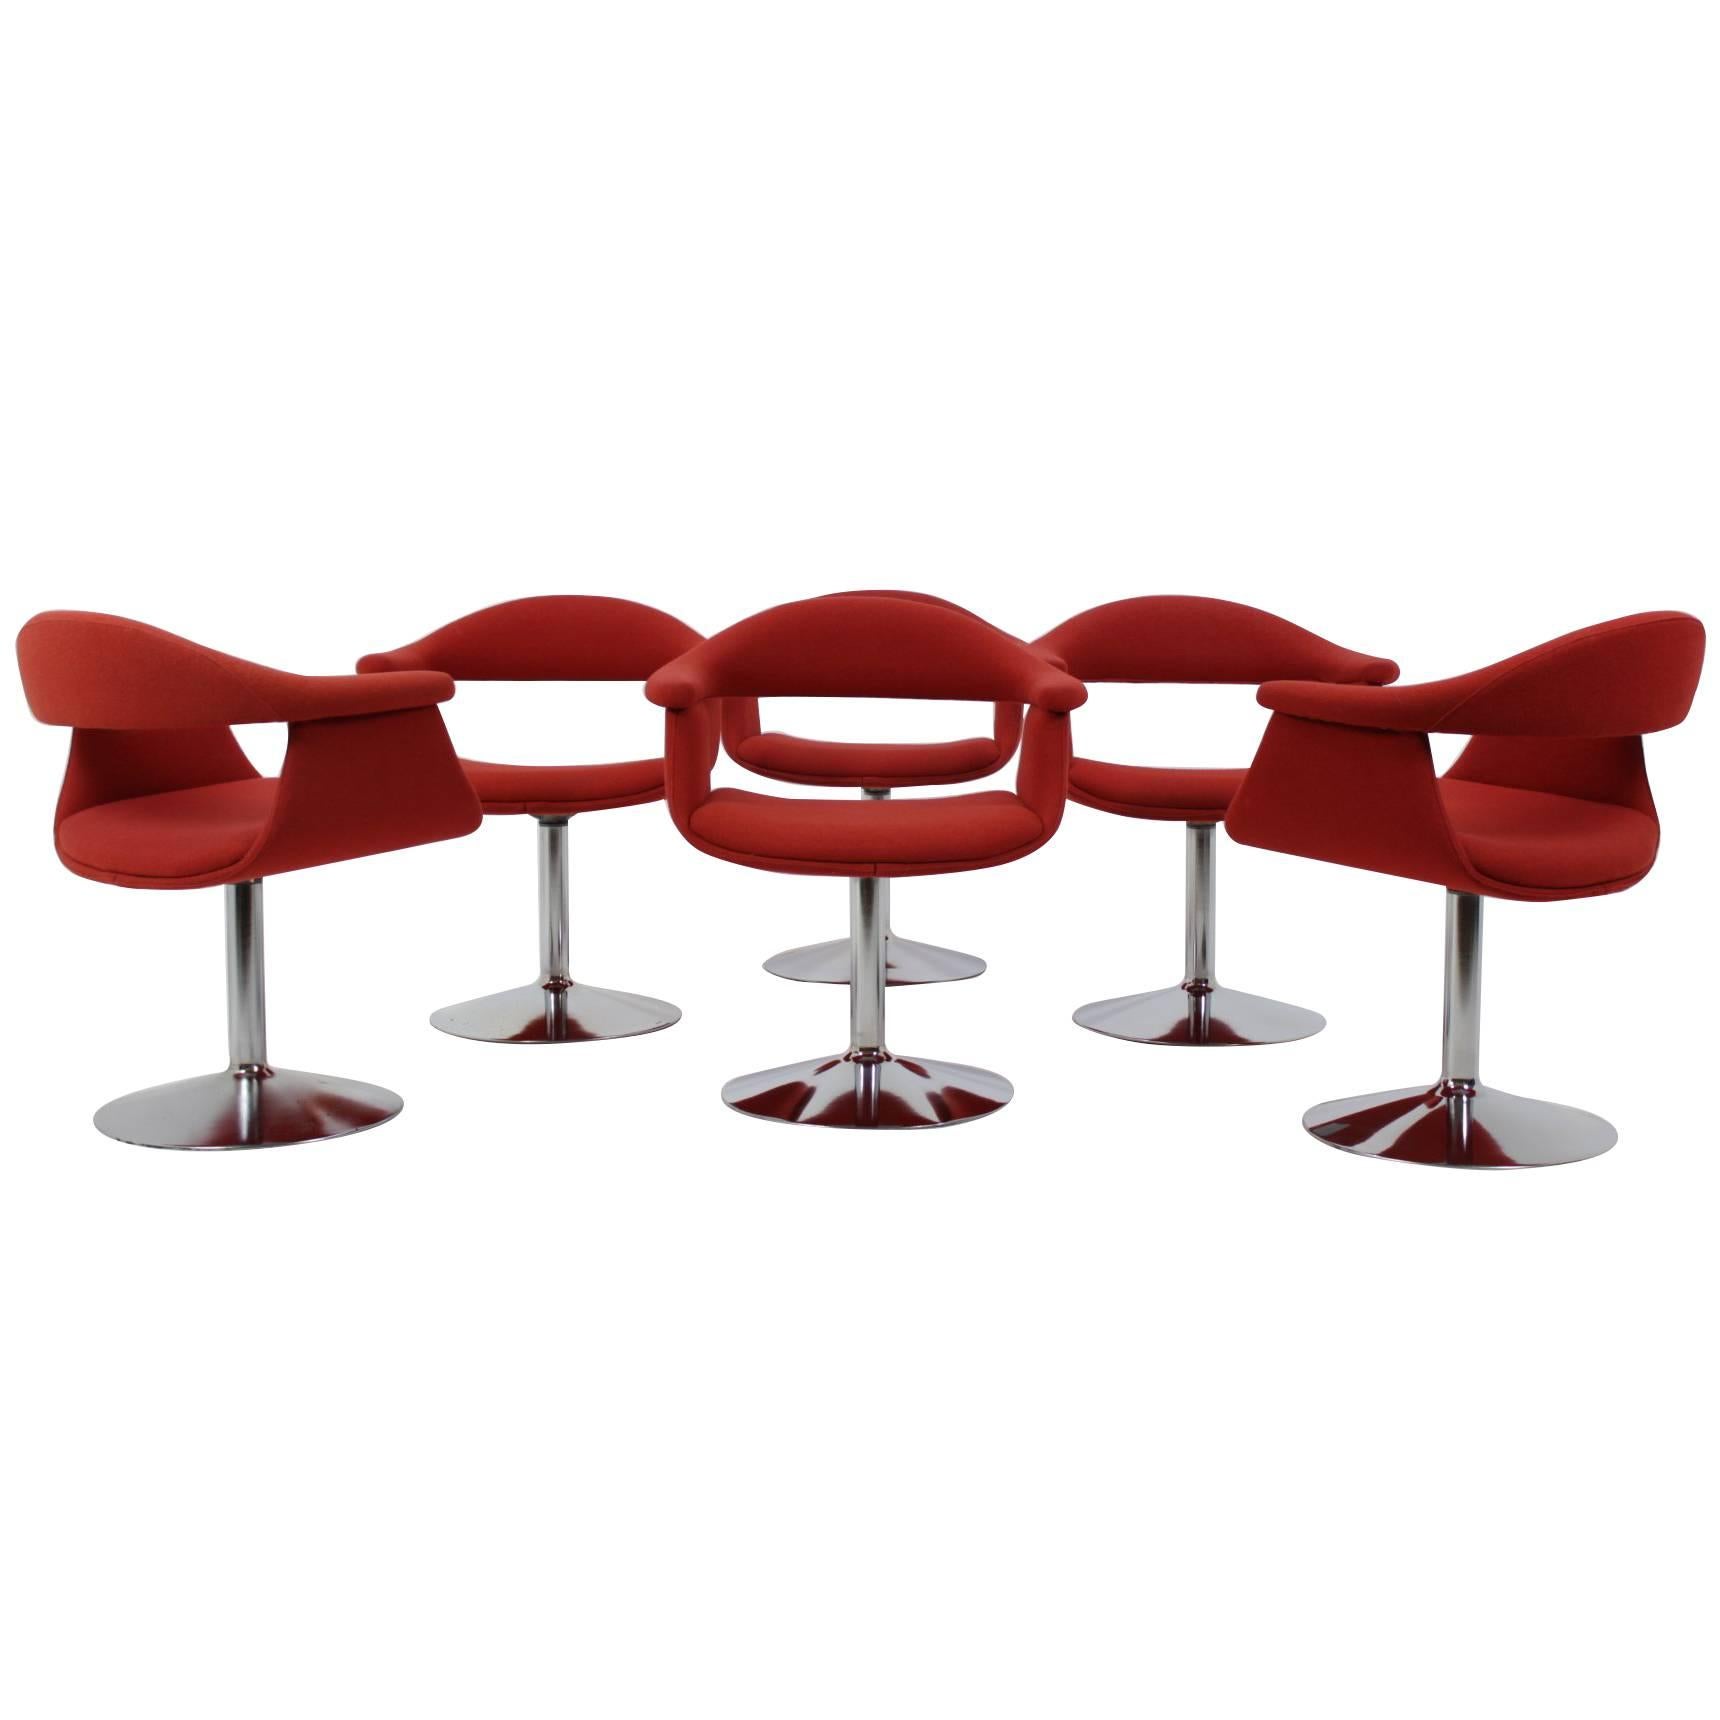 Six Rare "Captain's" Chairs by Eero Aarnio for Asko Lahti, Finland, 1966